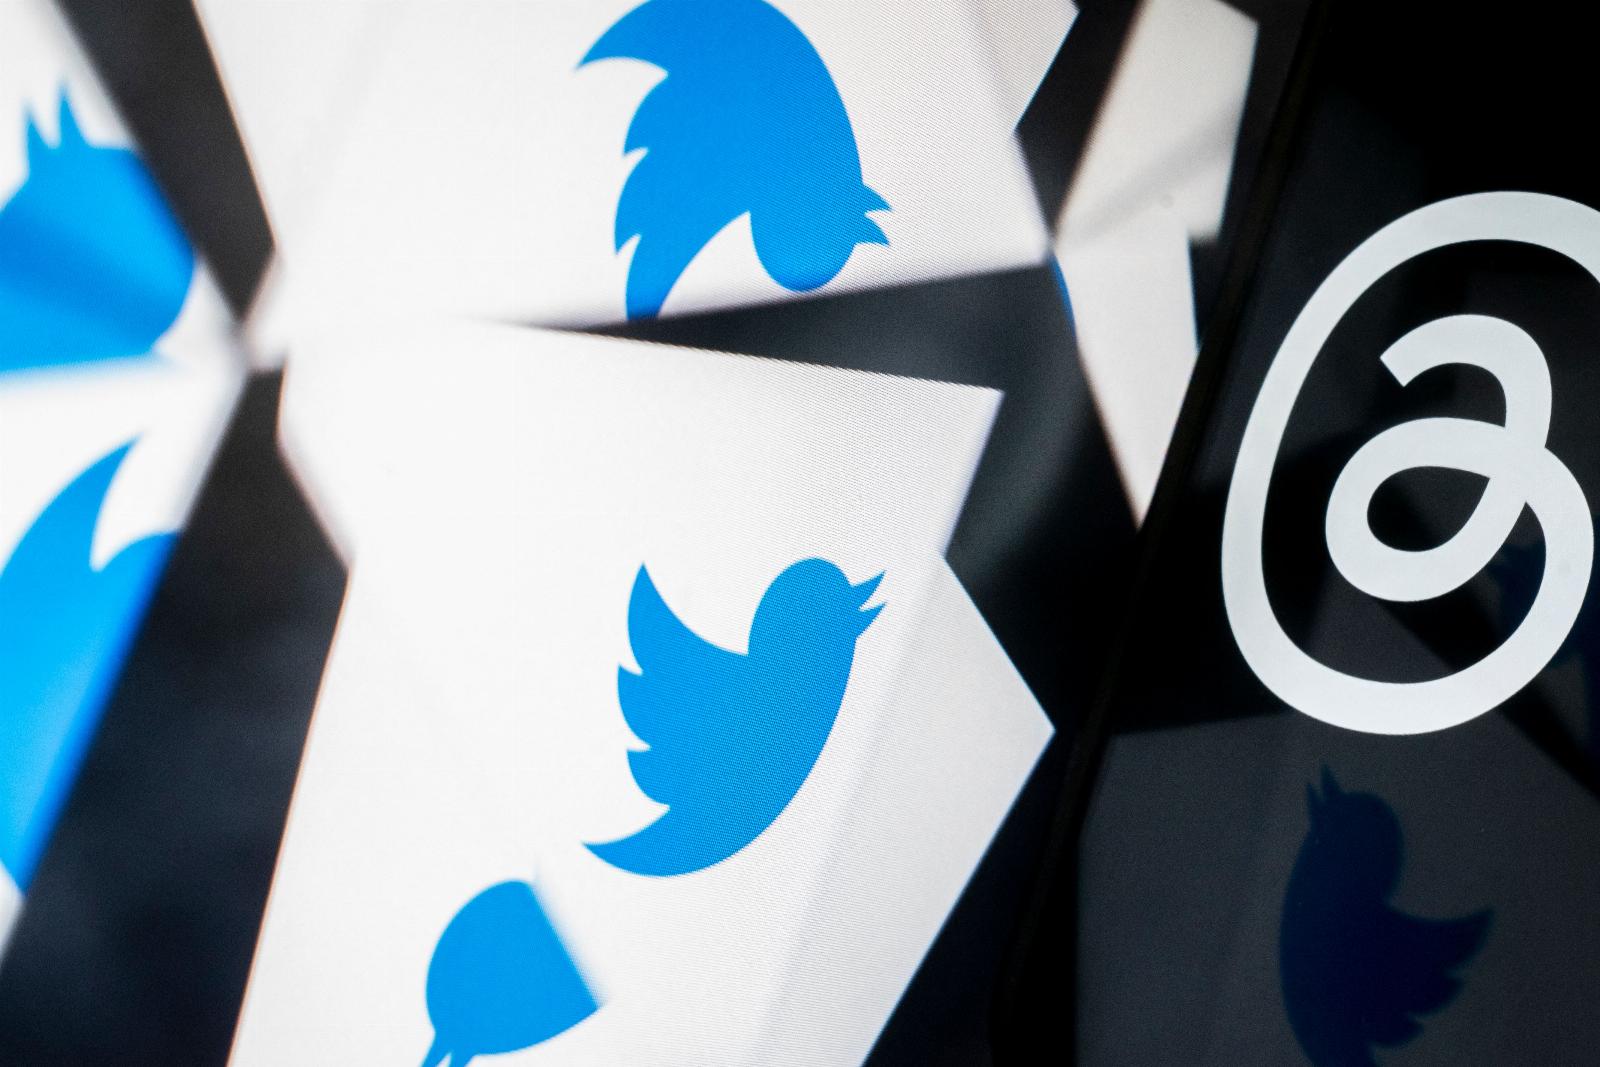 Twitter blocks links to rival Threads, while CEO downplays reports of traffic decline